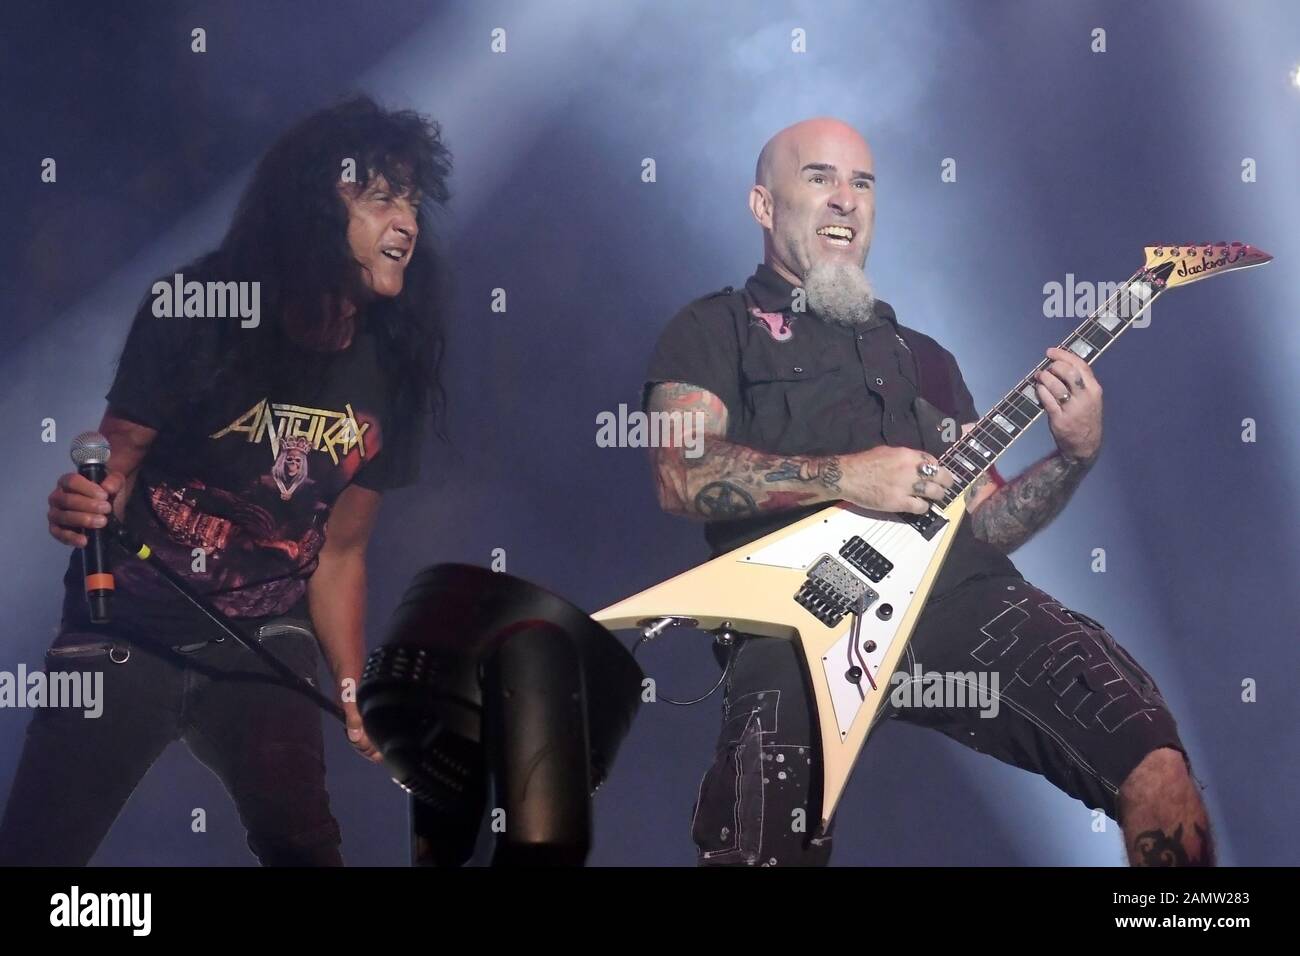 Rio de Janeiro, Brazil, October 4, 2019. Guitarist Scott Ian and vocalist Joey Belladonna of the heavy metal band Anthrax during a concert in Rock in Stock Photo